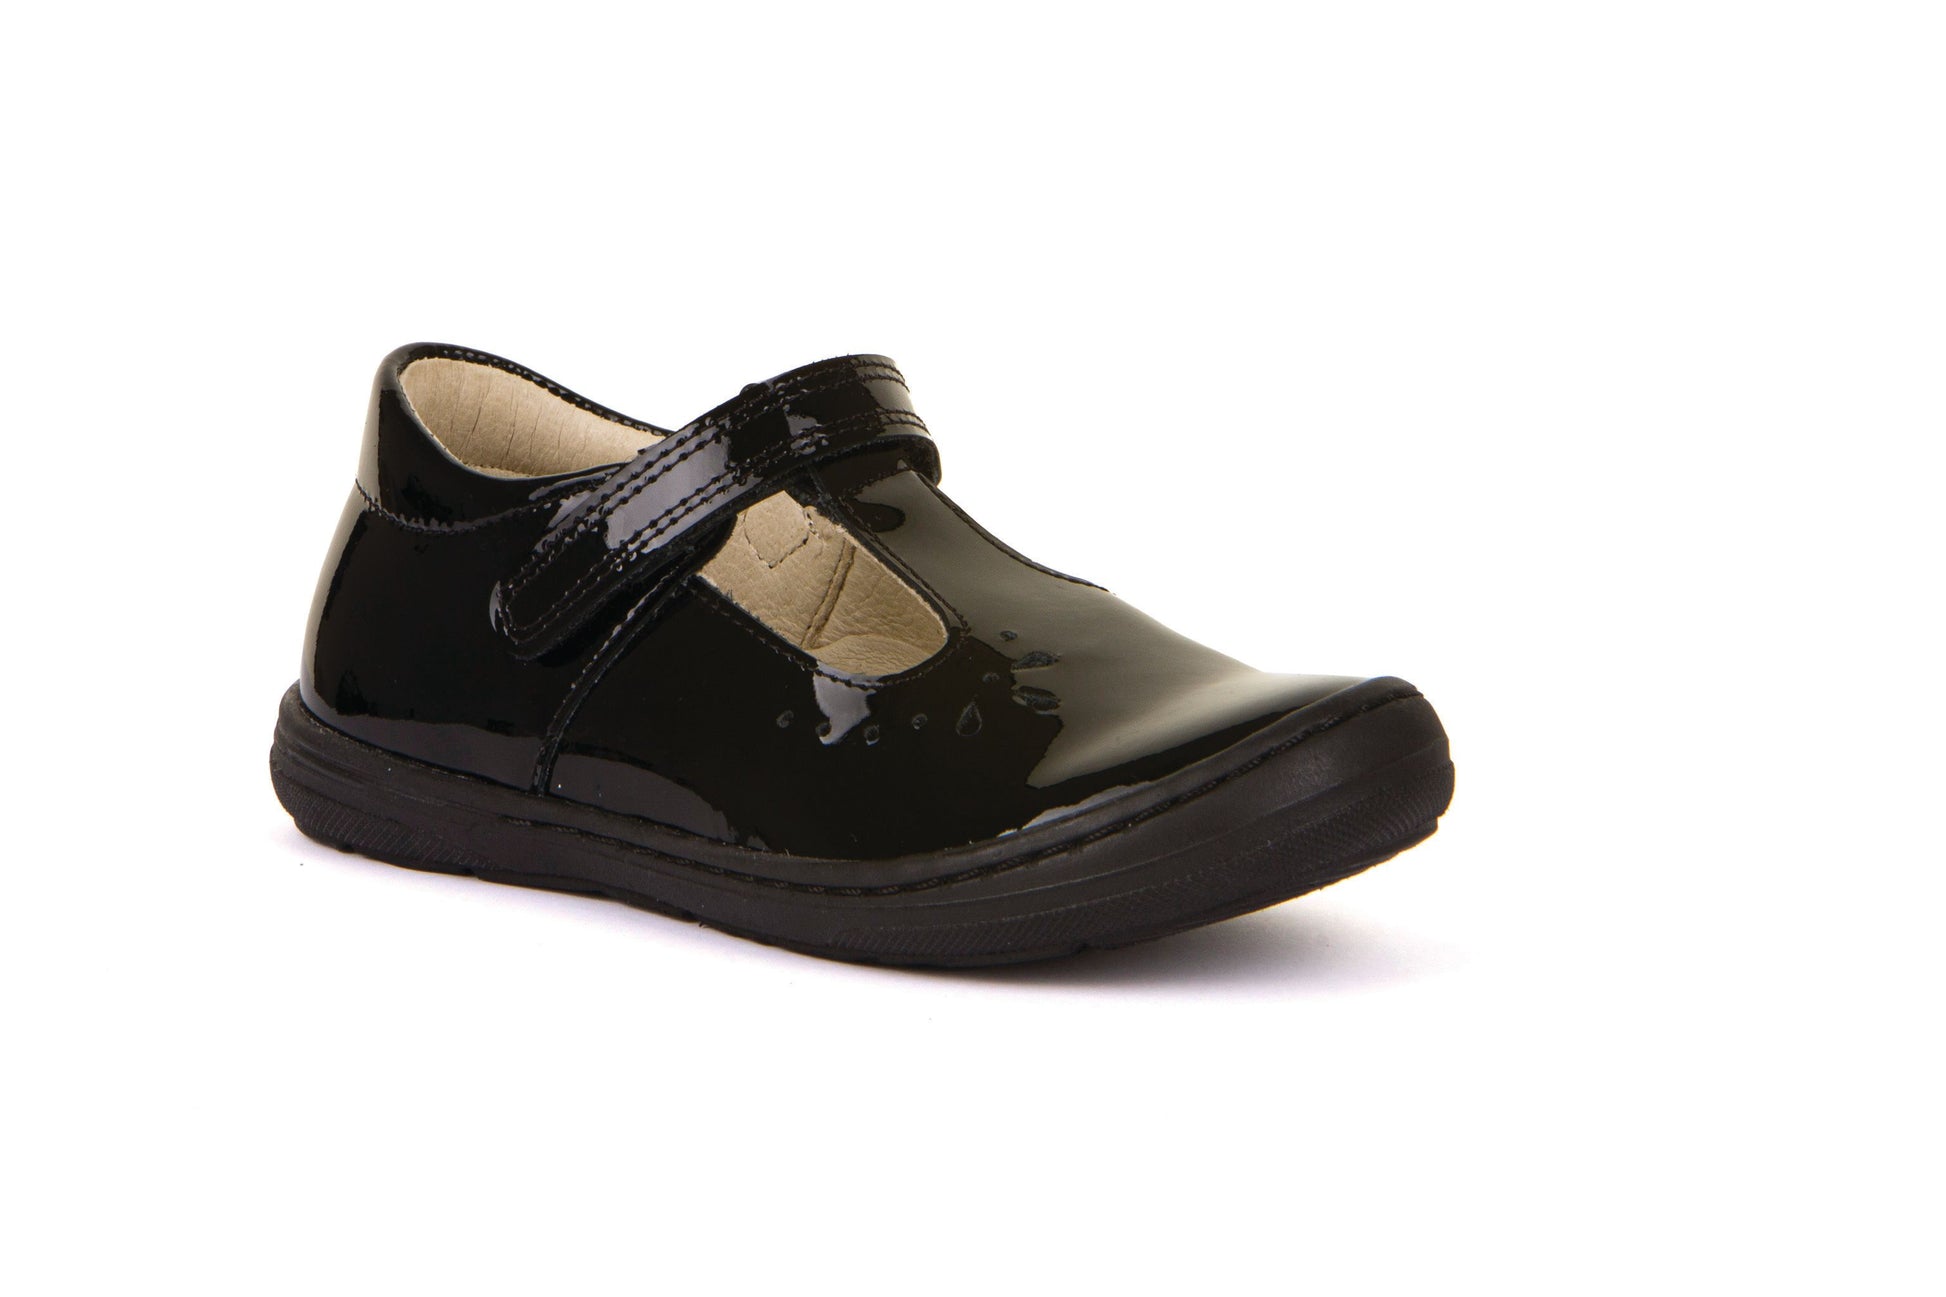 A girls T Bar school shoe by Froddo, style Mia T, in black patent with velcro fastening. Right side view.